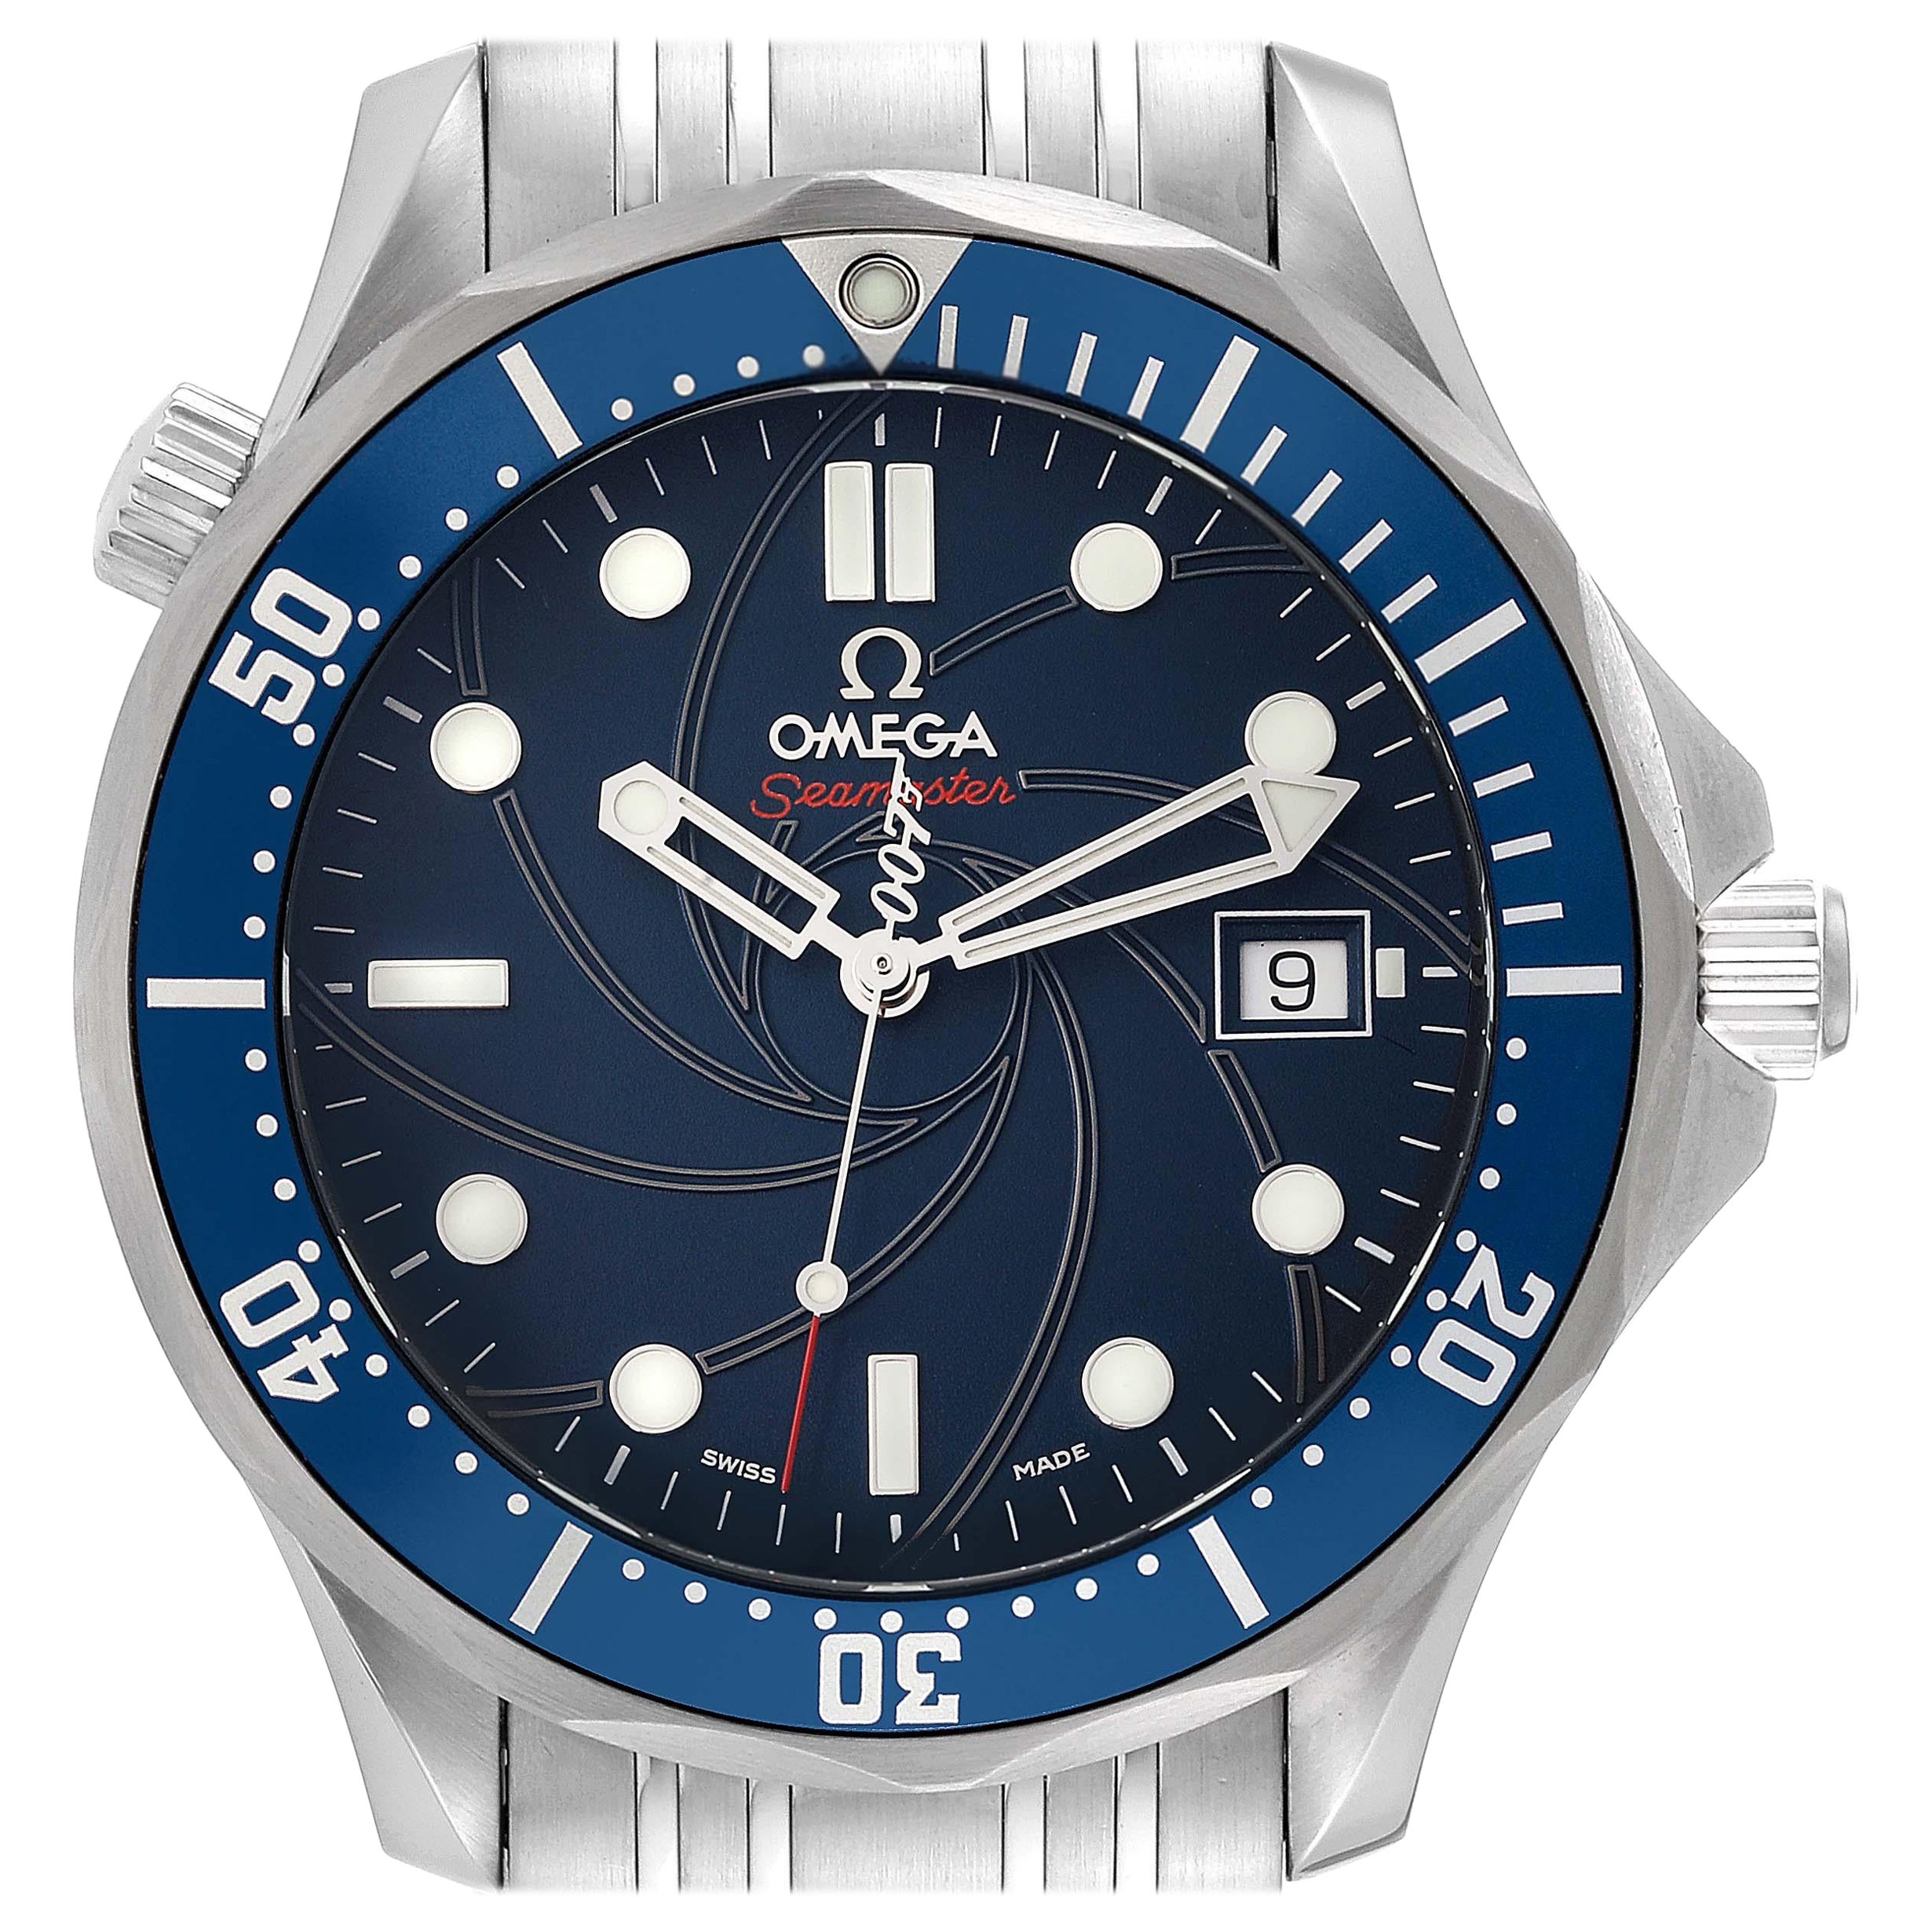 Omega Seamaster Bond 007 Limited Edition Steel Mens Watch 2226.80.00 Box Card For Sale